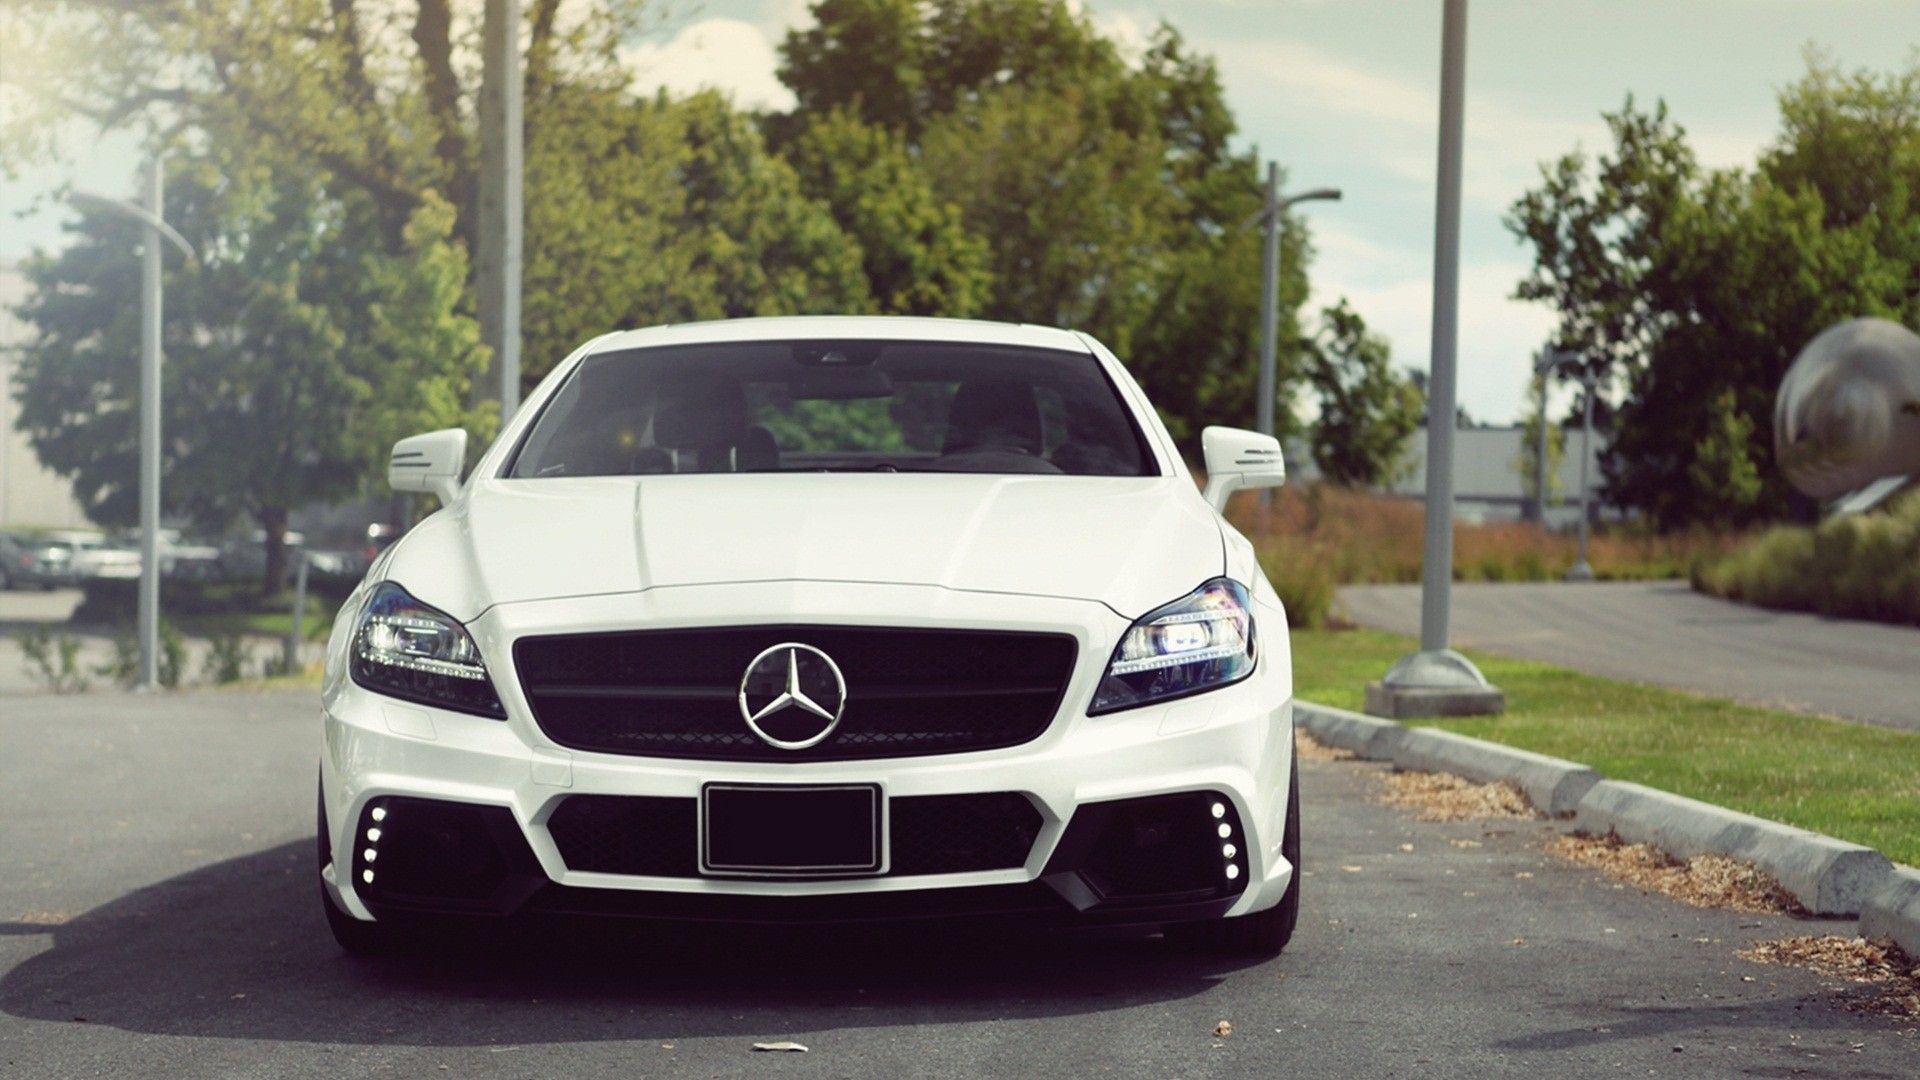 Mercedes Benz, Supercars Wallpapers HD / Desktop and Mobile ...